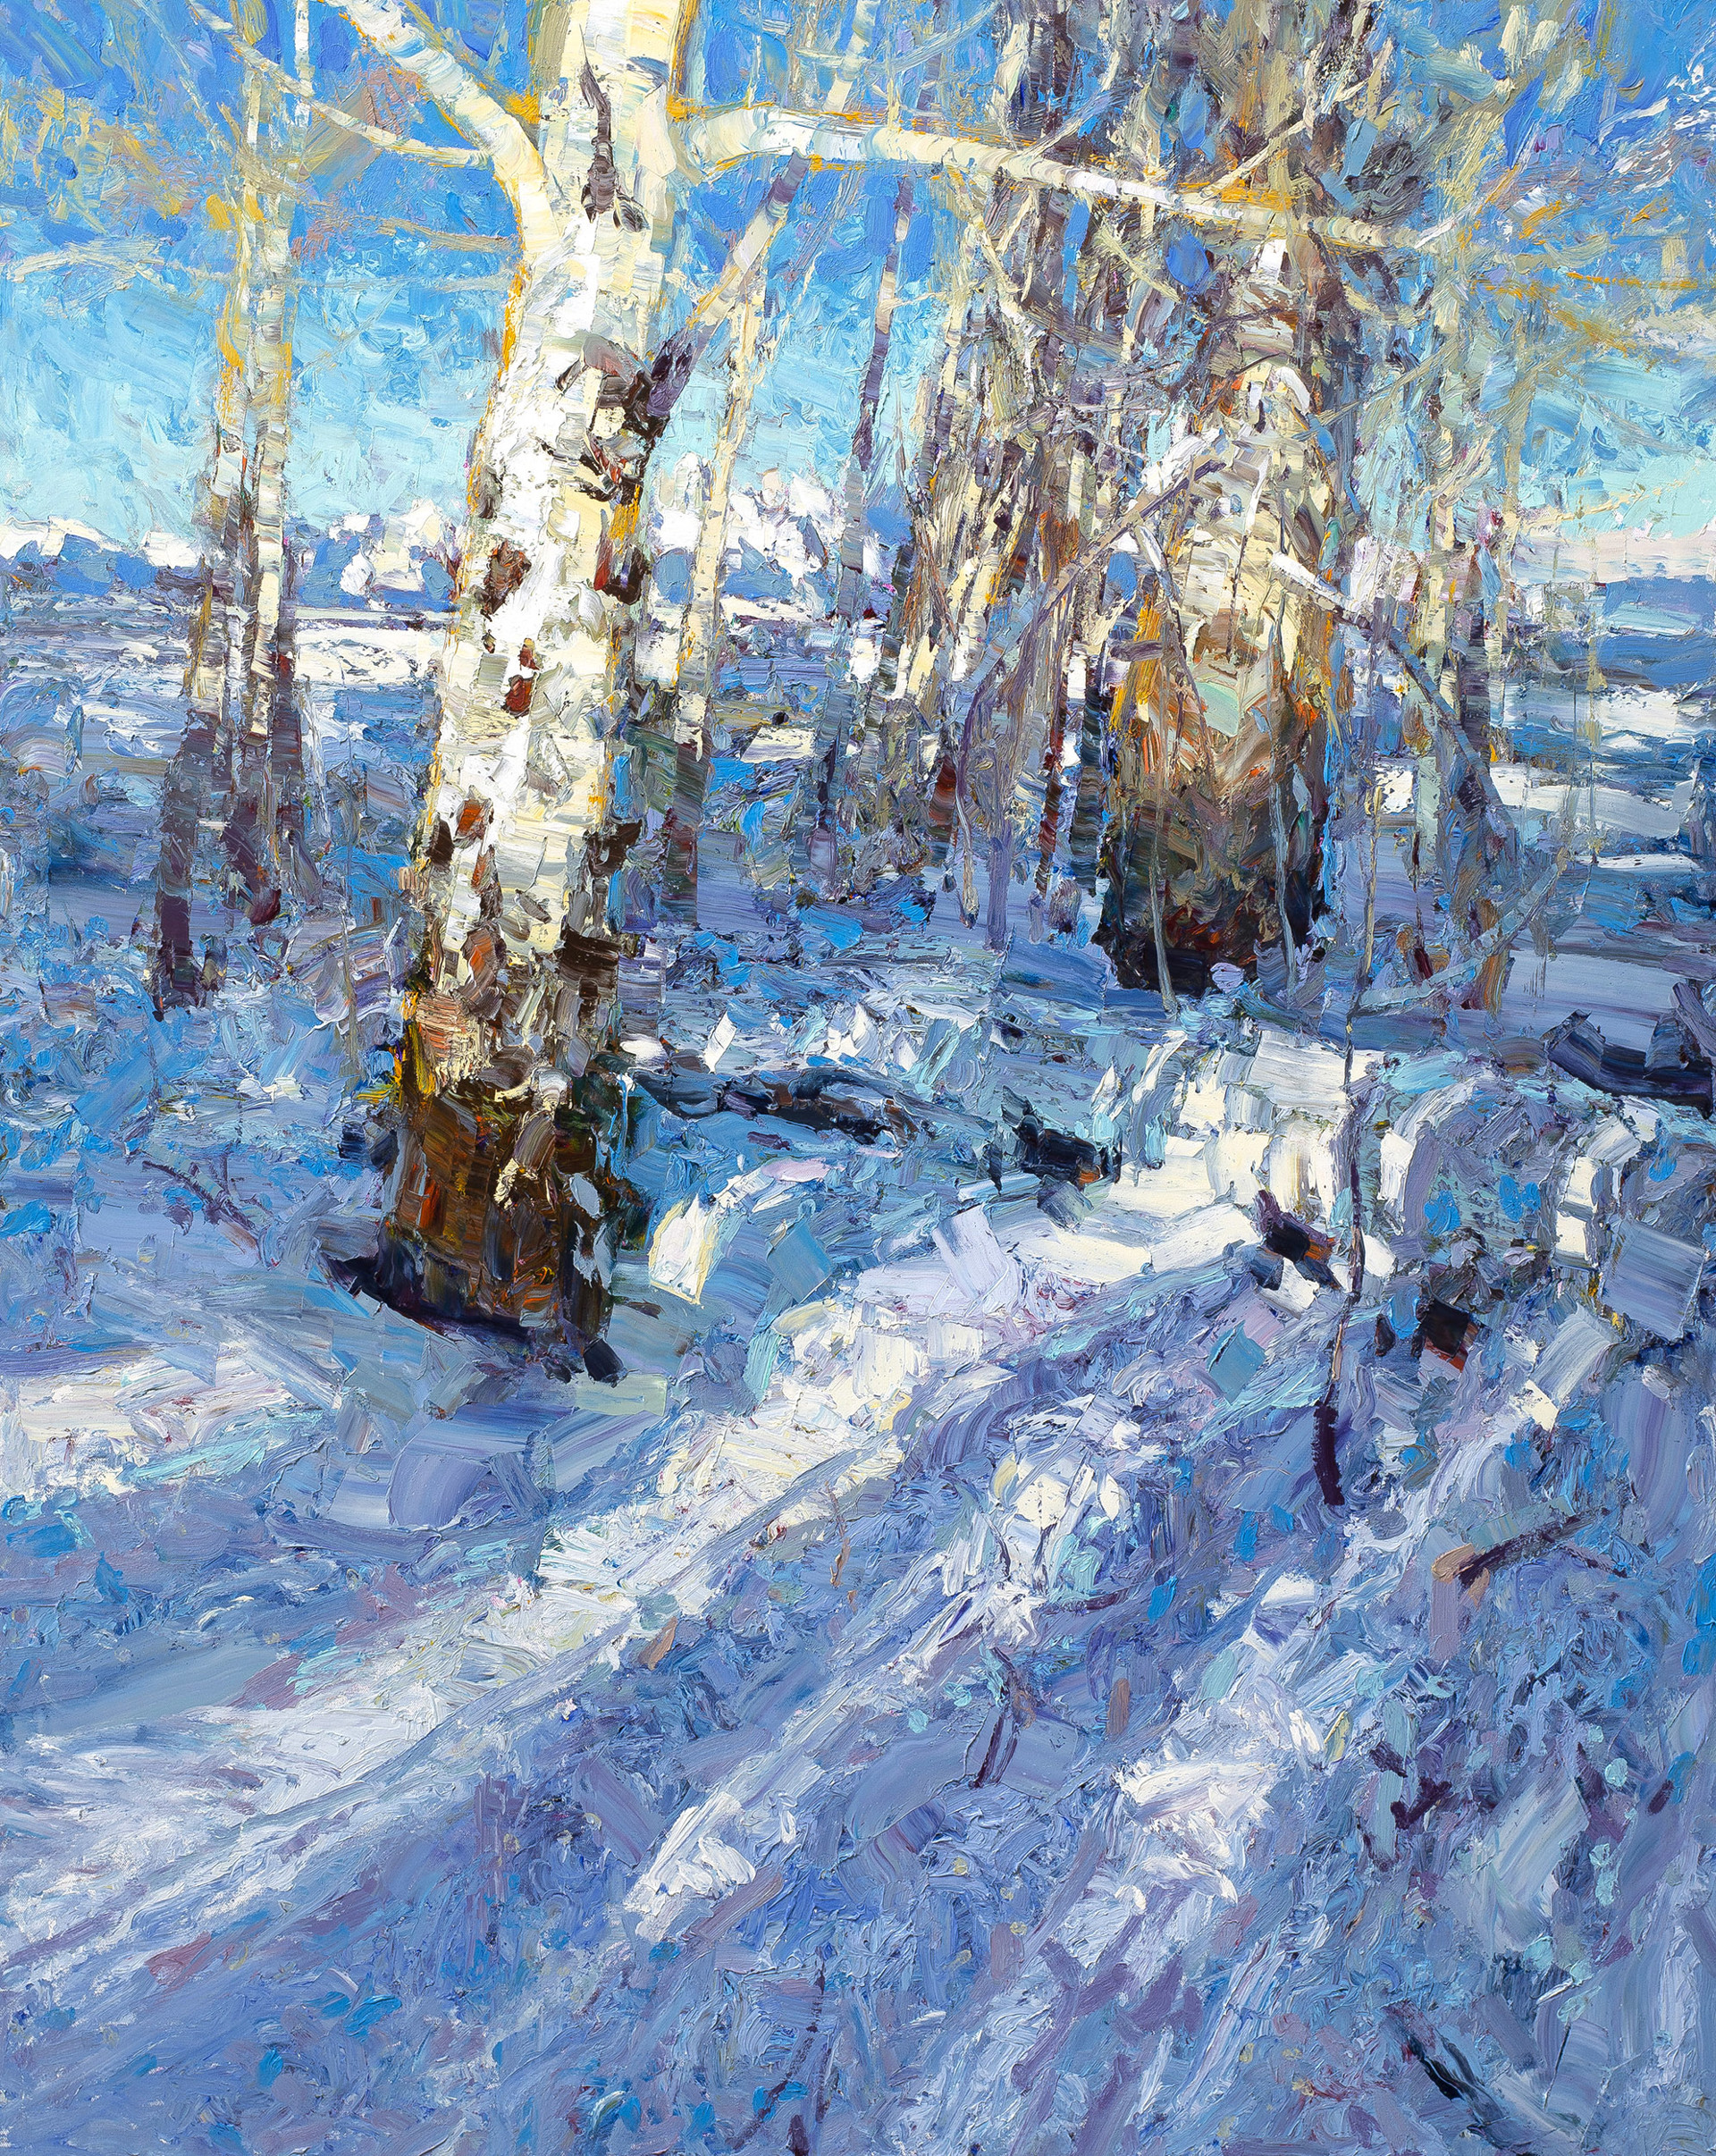 Original Oil Painting Featuring A Winter Woodsy Landscape With Blue Sky